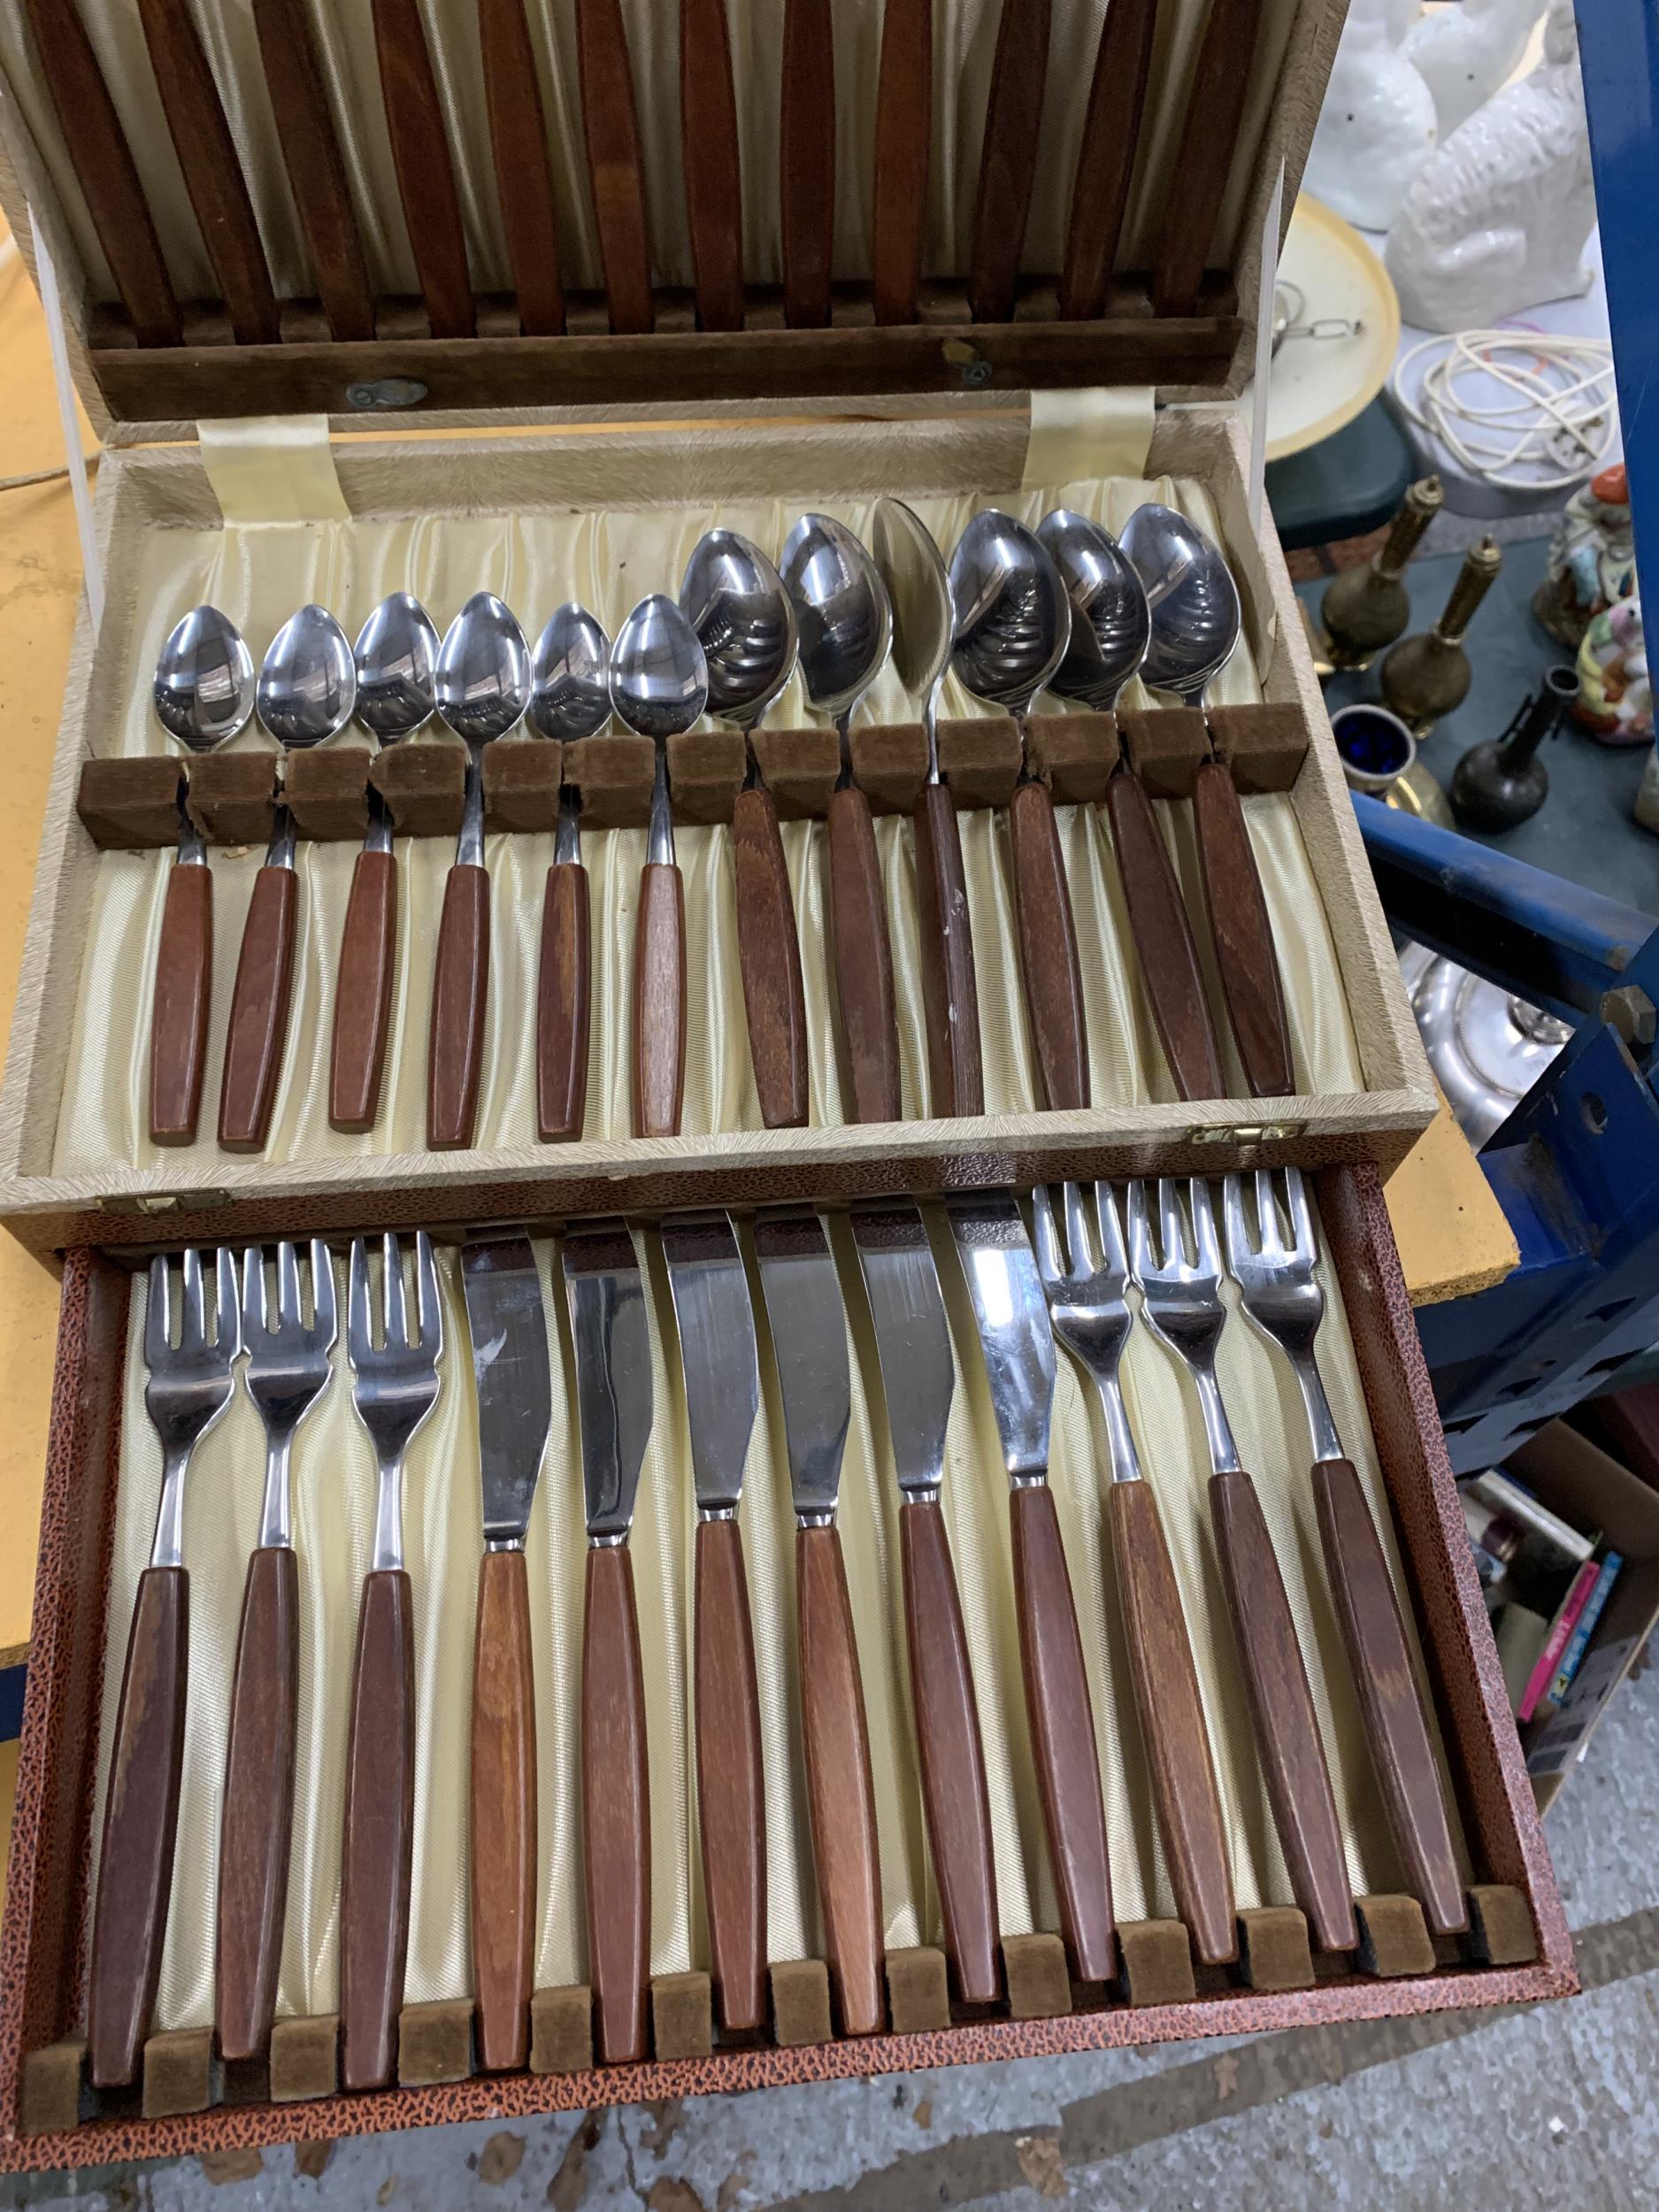 A BOXED COMPLETE CANTEEN OF CUTLERY - Image 4 of 5